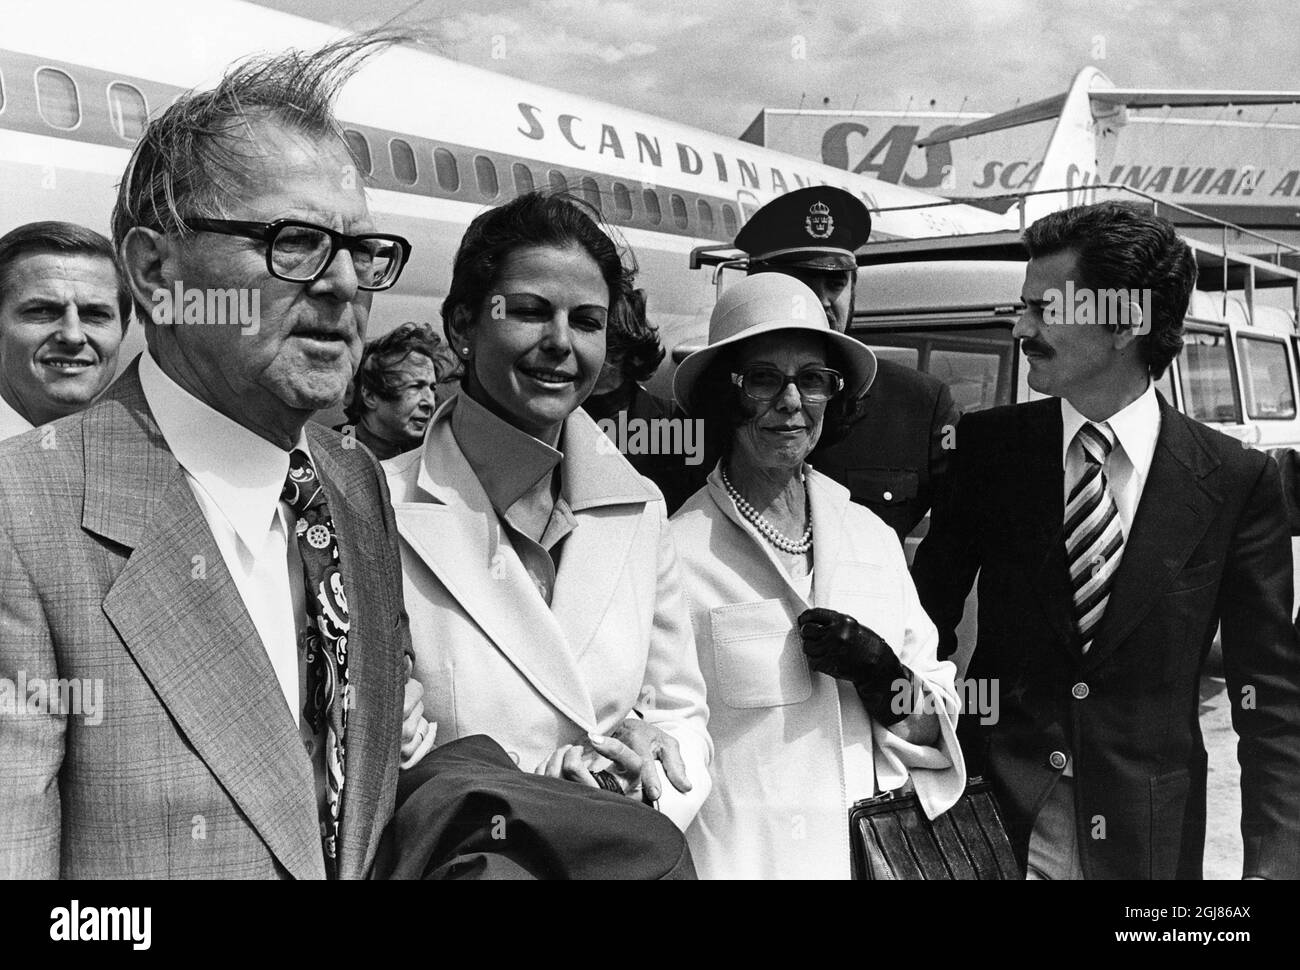 FILE STOCKHOLM 19760617. Silvia Sommerlath meets her parents Walther and Alice and her brother Joerg at Arlanda airport, two days ahead of her wedding to Swedish King Carl XVI Gustaf. Foto: Lasse Jansson / XP / SCANPIX / code 22  Stock Photo